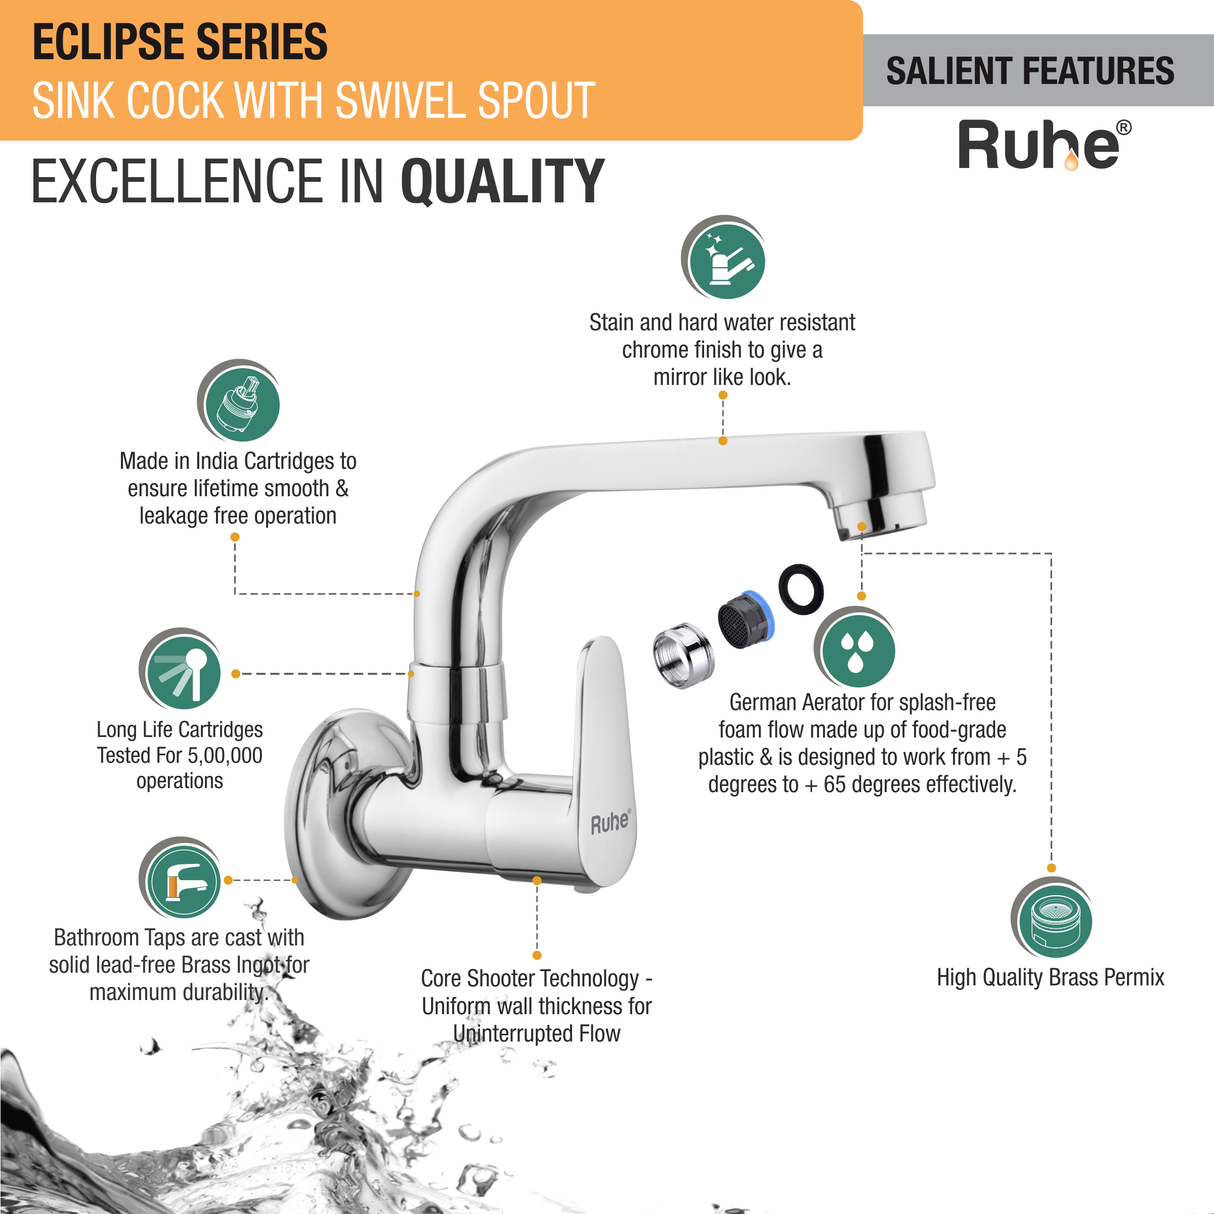 Eclipse Sink Tap With Small (7 inches) Round Swivel Spout Faucet features